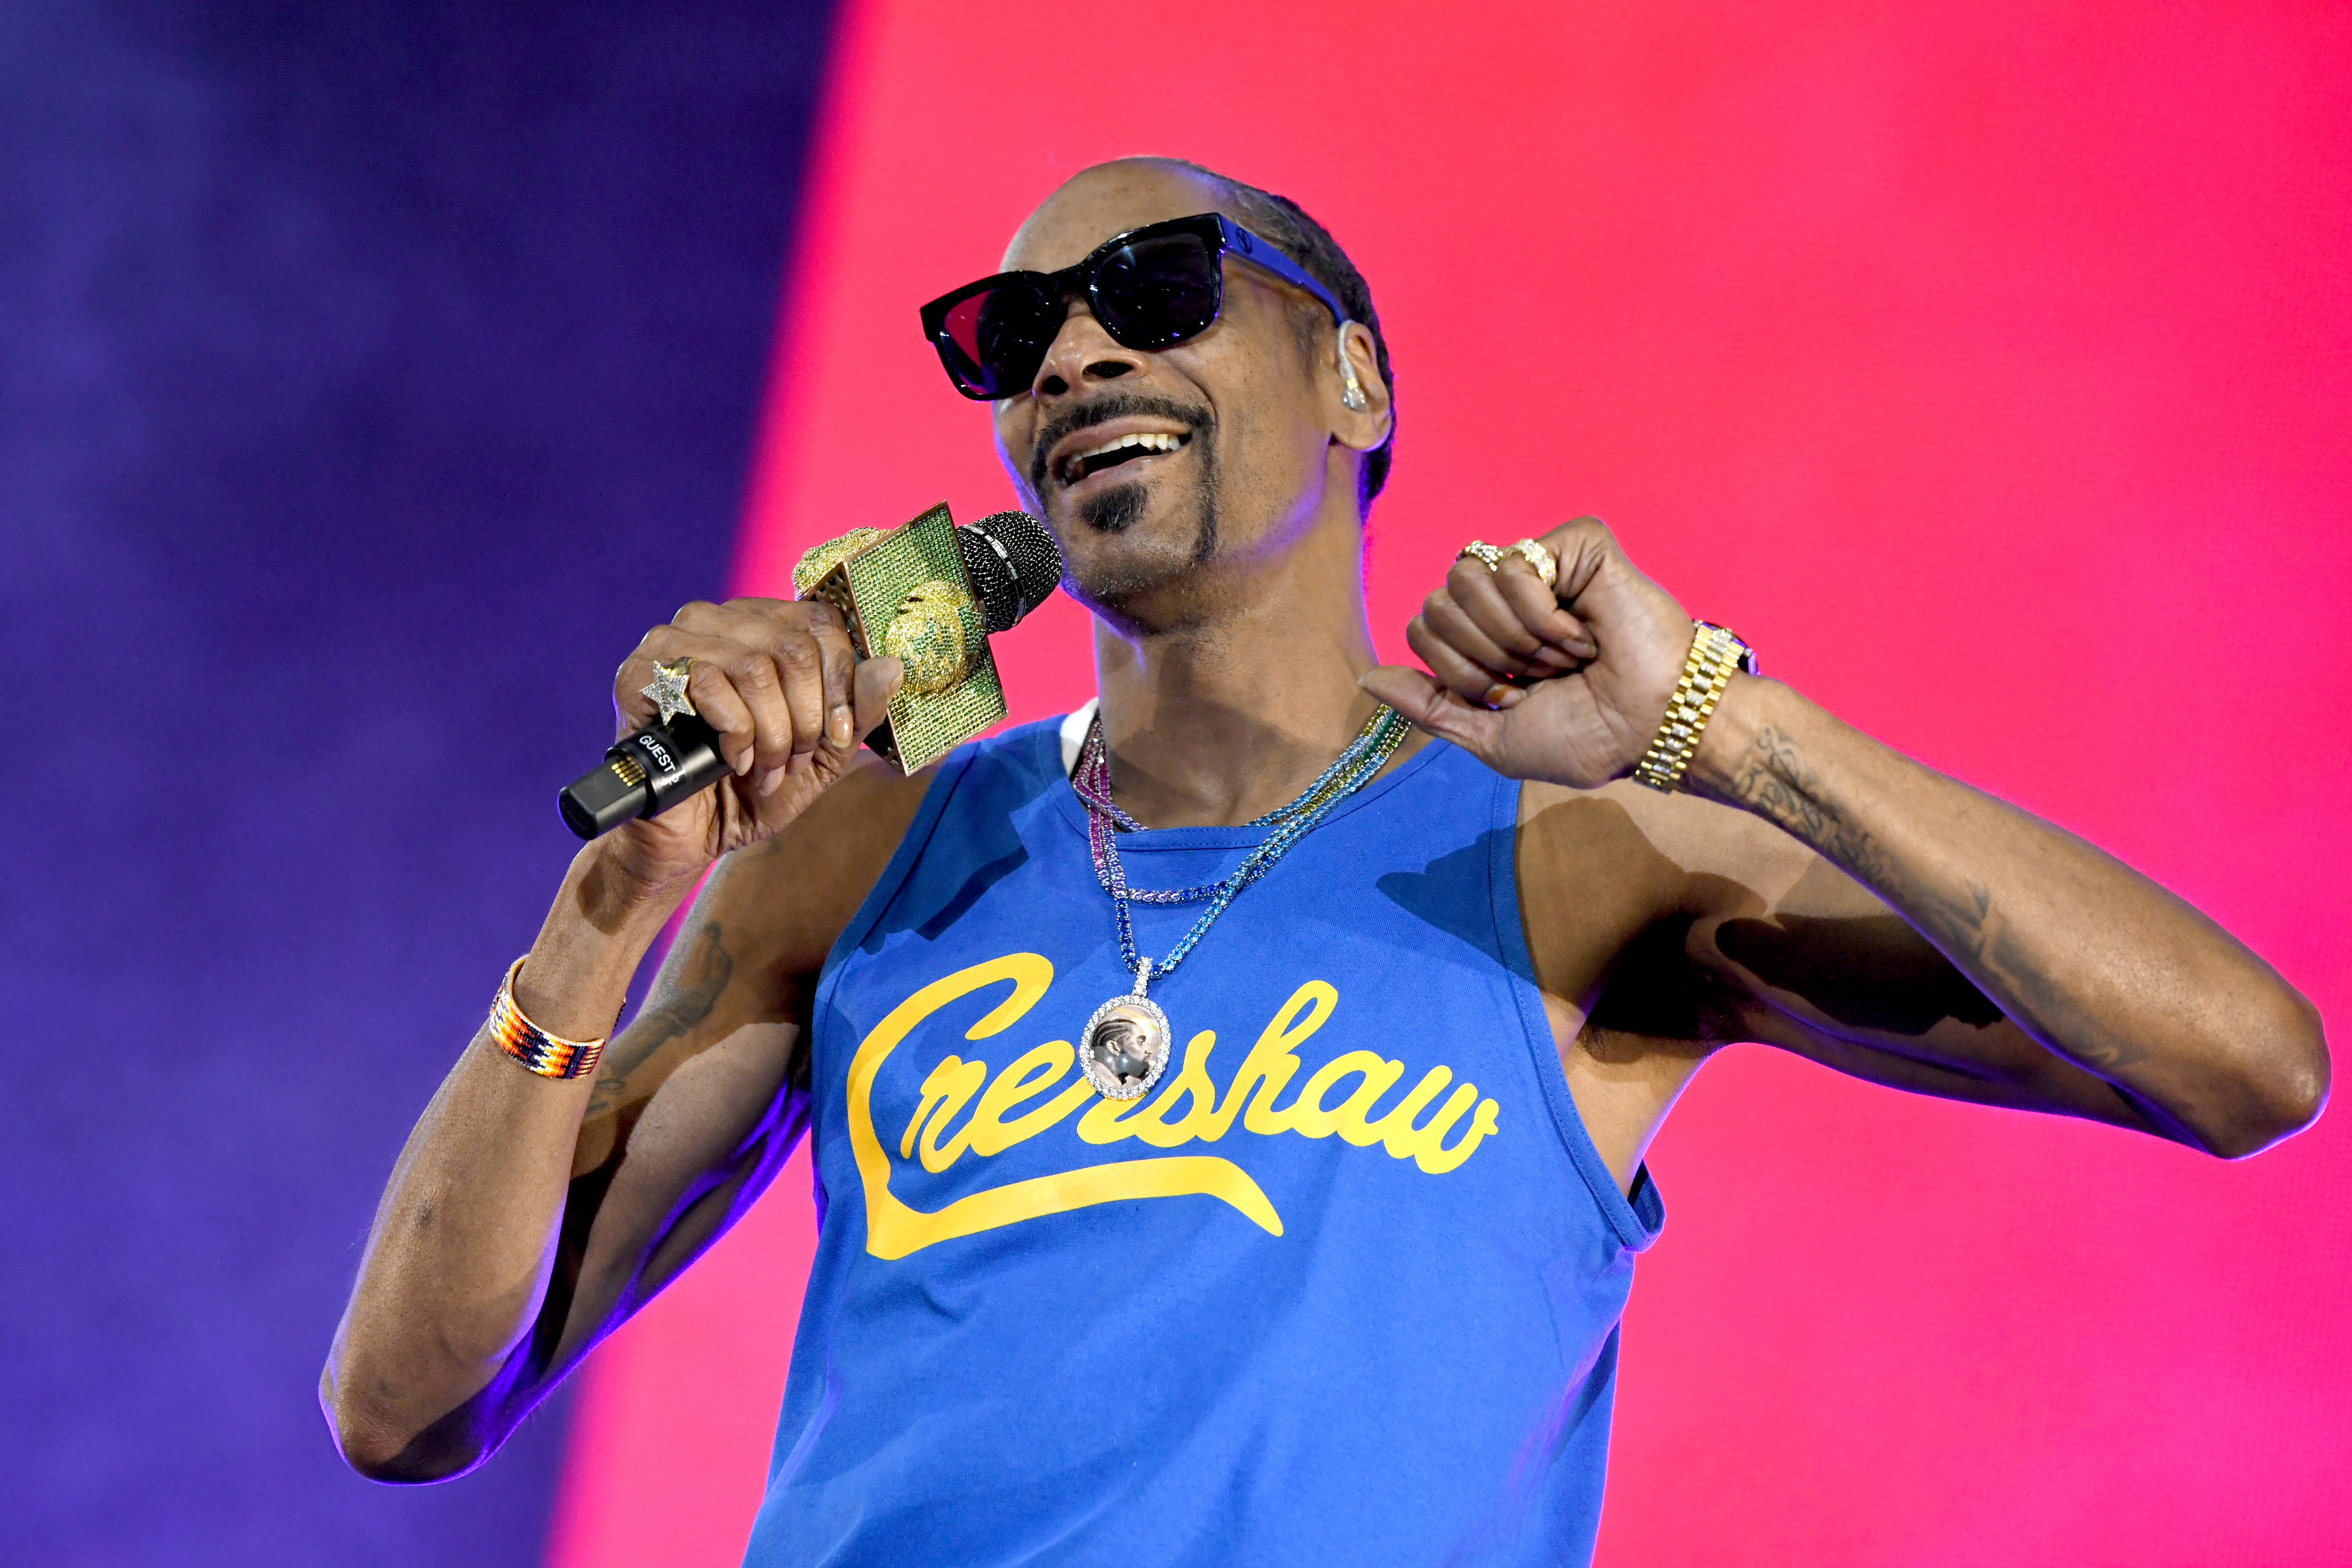 Snoop Dogg Reacts To 6ix9ine Hiring New Lawyer: “Let That Rat Rot”